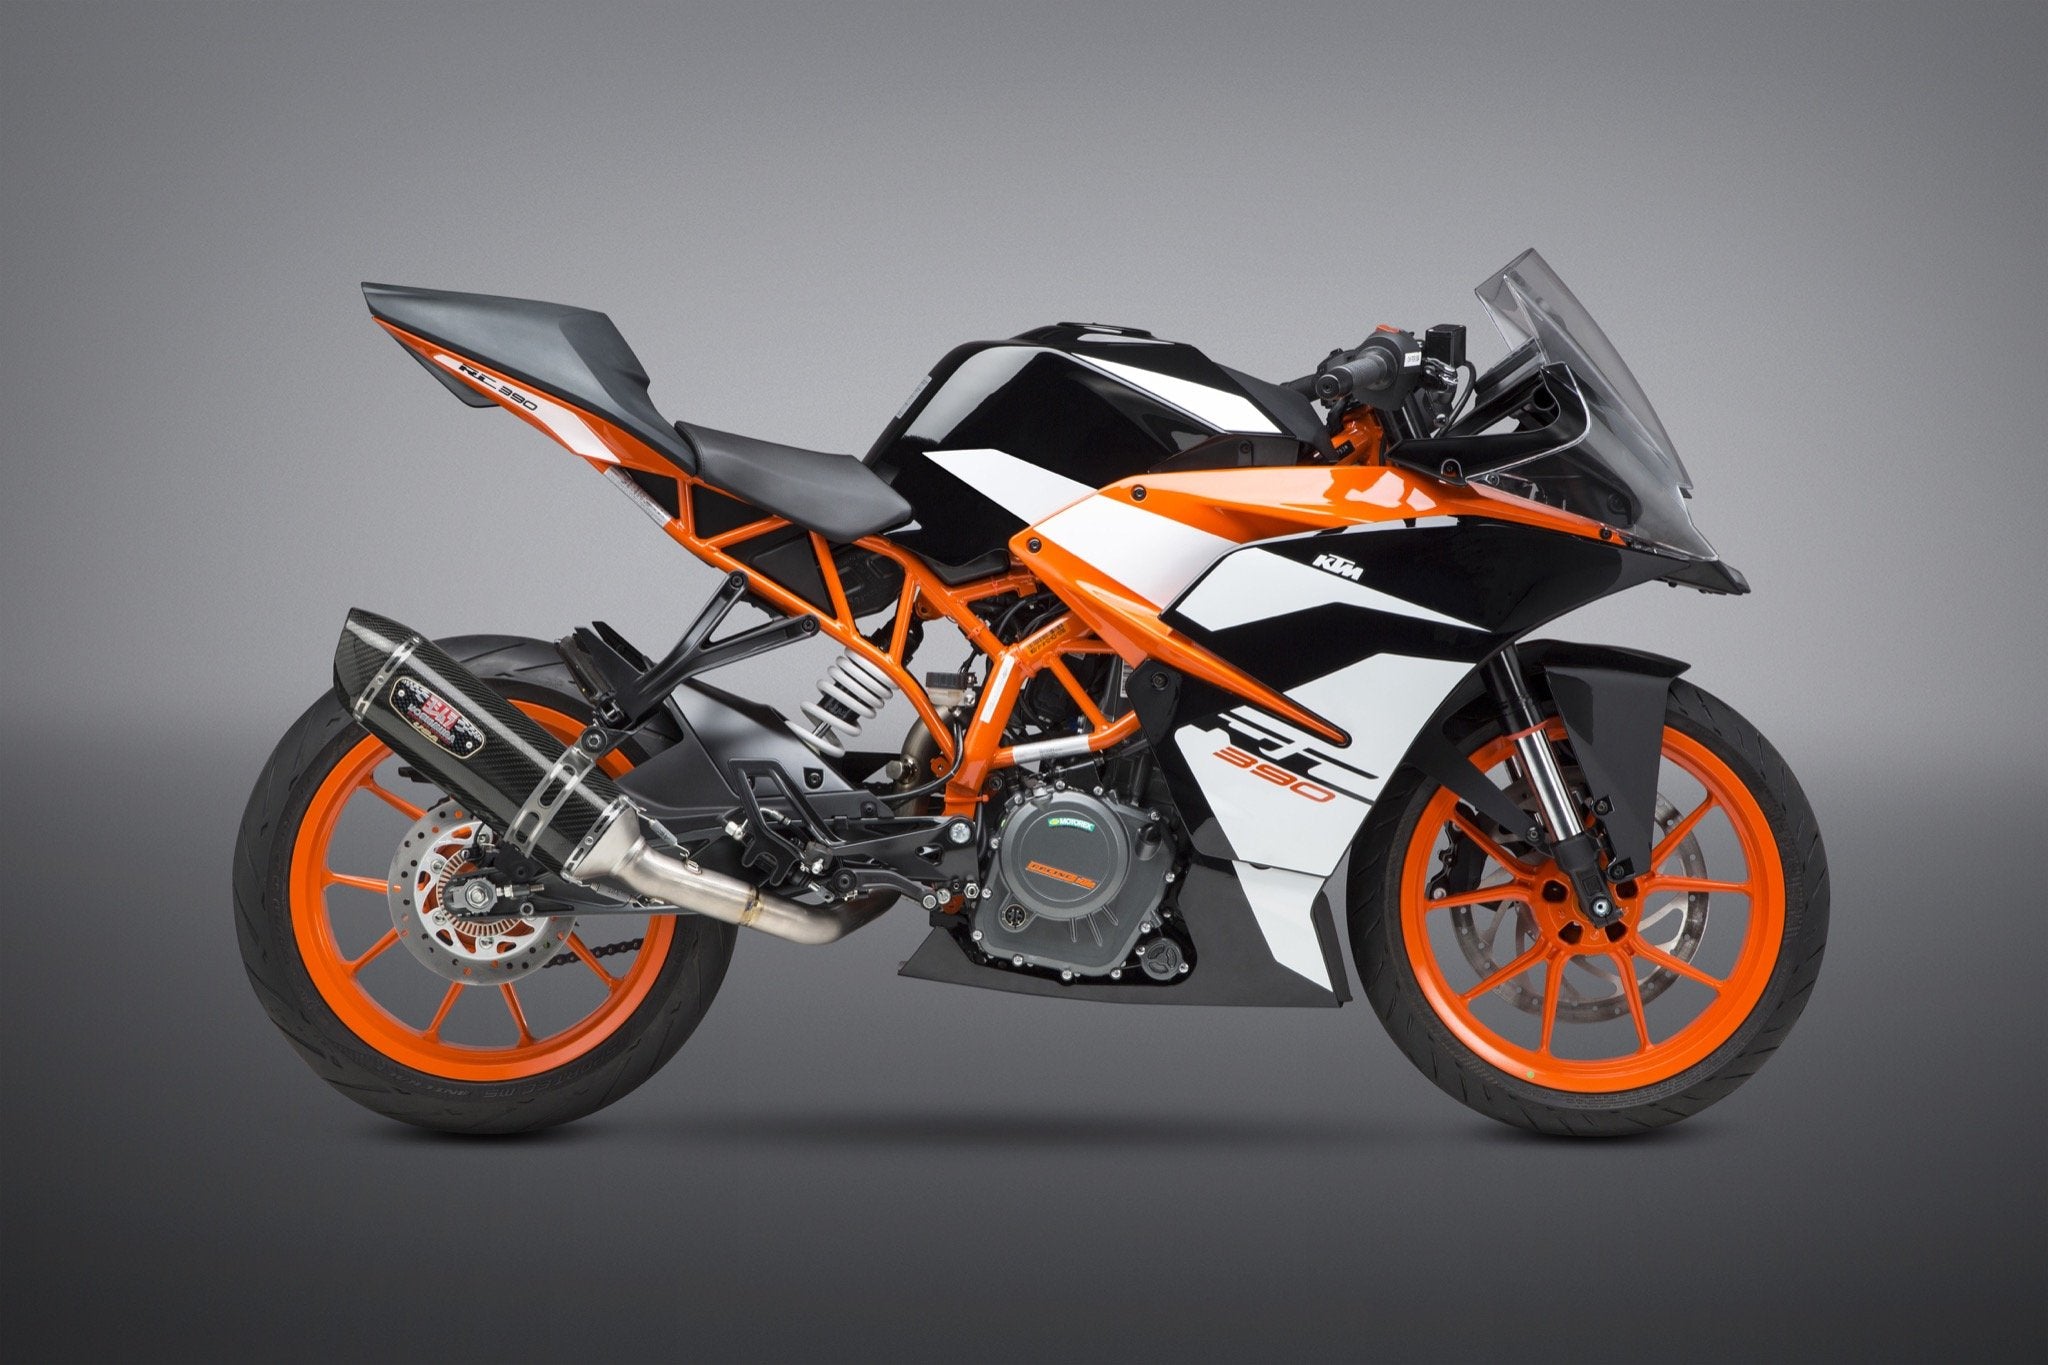 KTM RC 125 and 390 Showcased In New Colour Schemes At 2019 EICMA